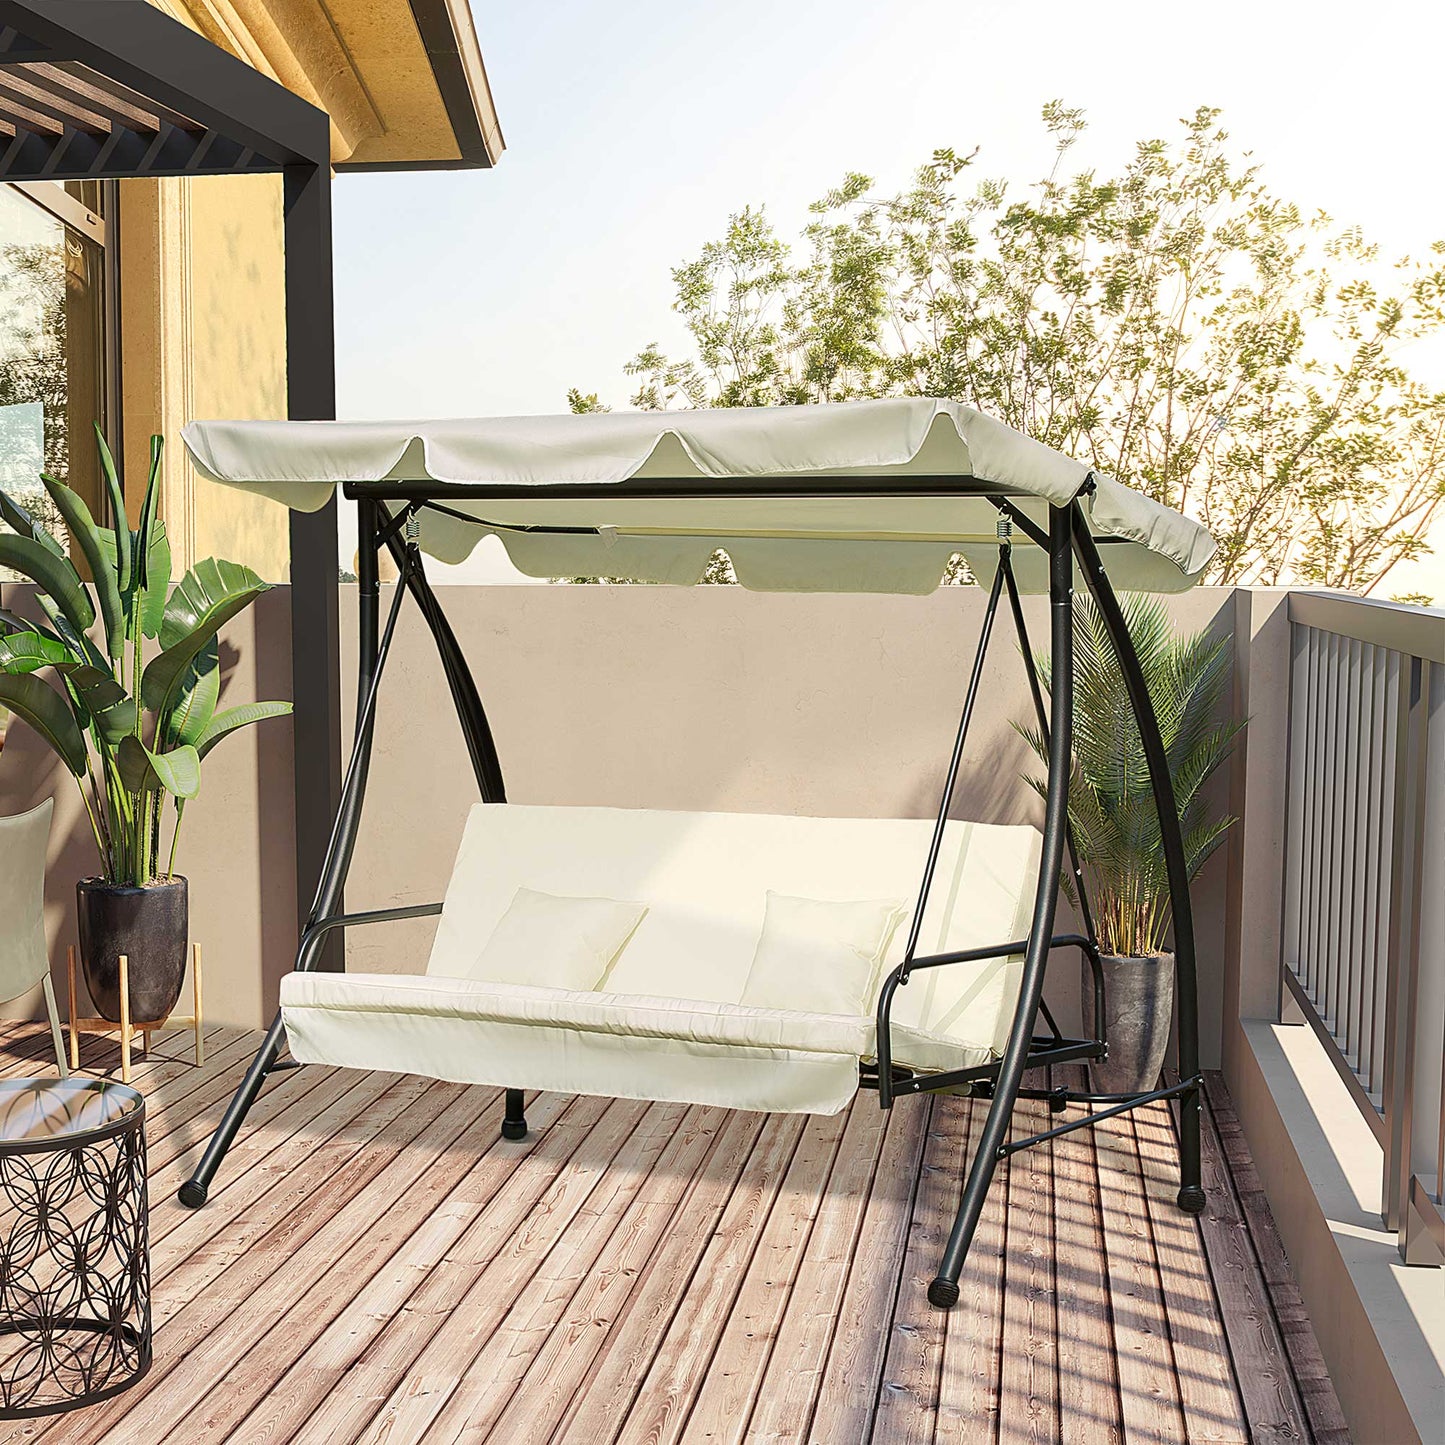 Outsunny 3 Seater Swing Chair 2-in-1 Hammock Bed Patio Garden Chair with Adjustable Canopy and Cushions, Cream White